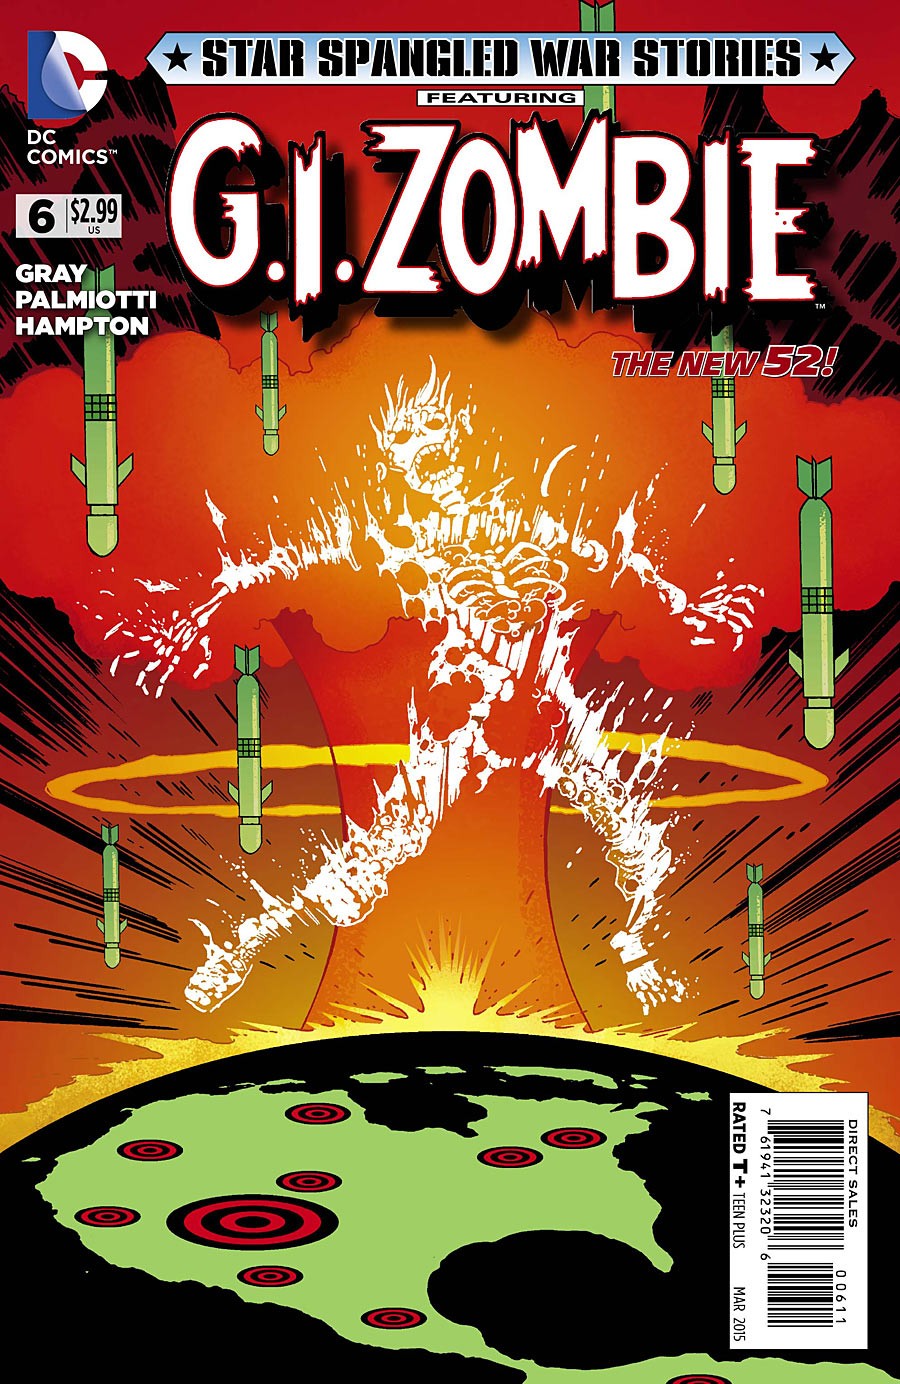 Star-Spangled War Stories Featuring G.I. Zombie Vol. 1 #6